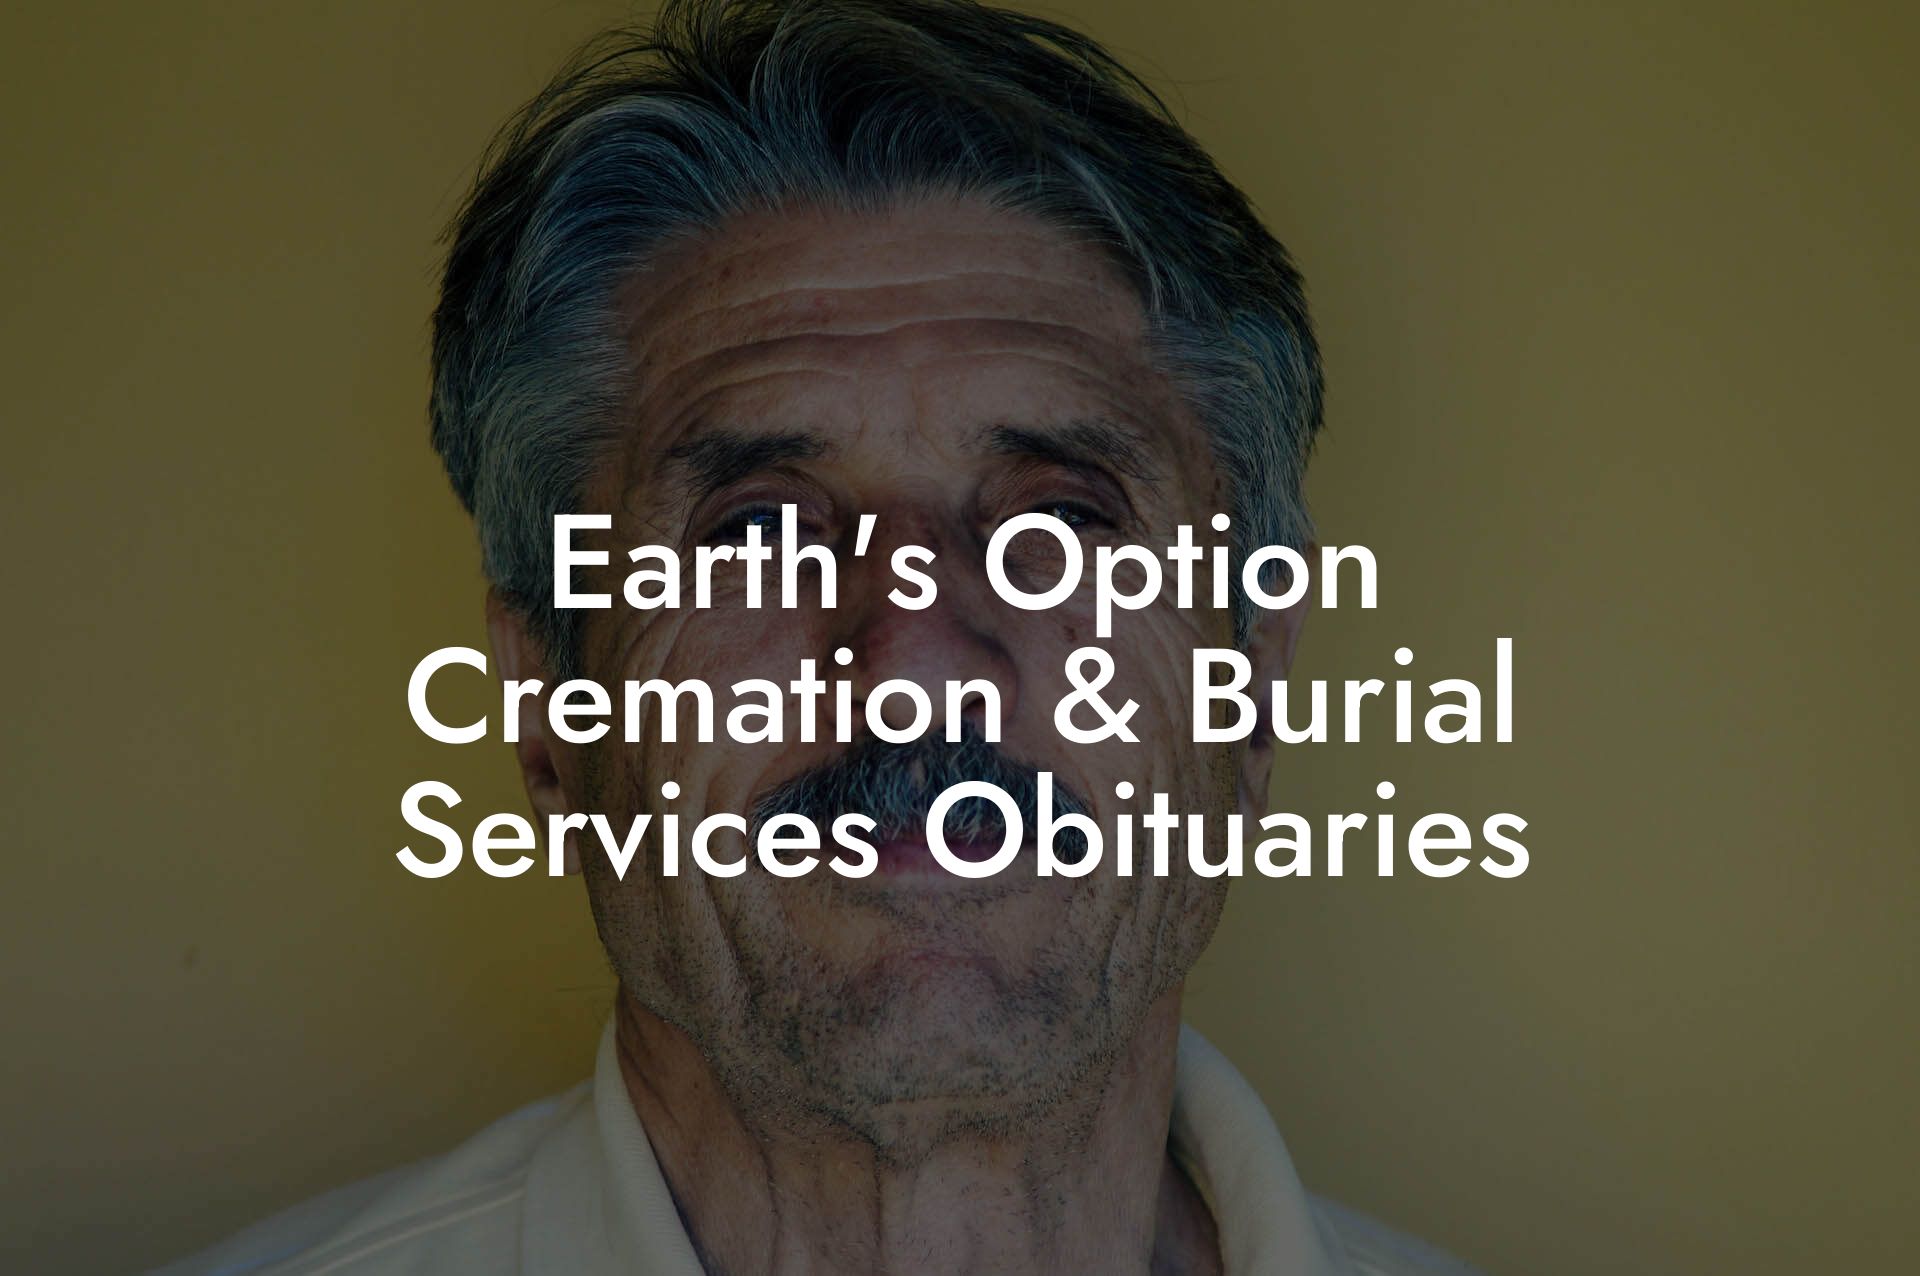 Earth's Option Cremation & Burial Services Obituaries